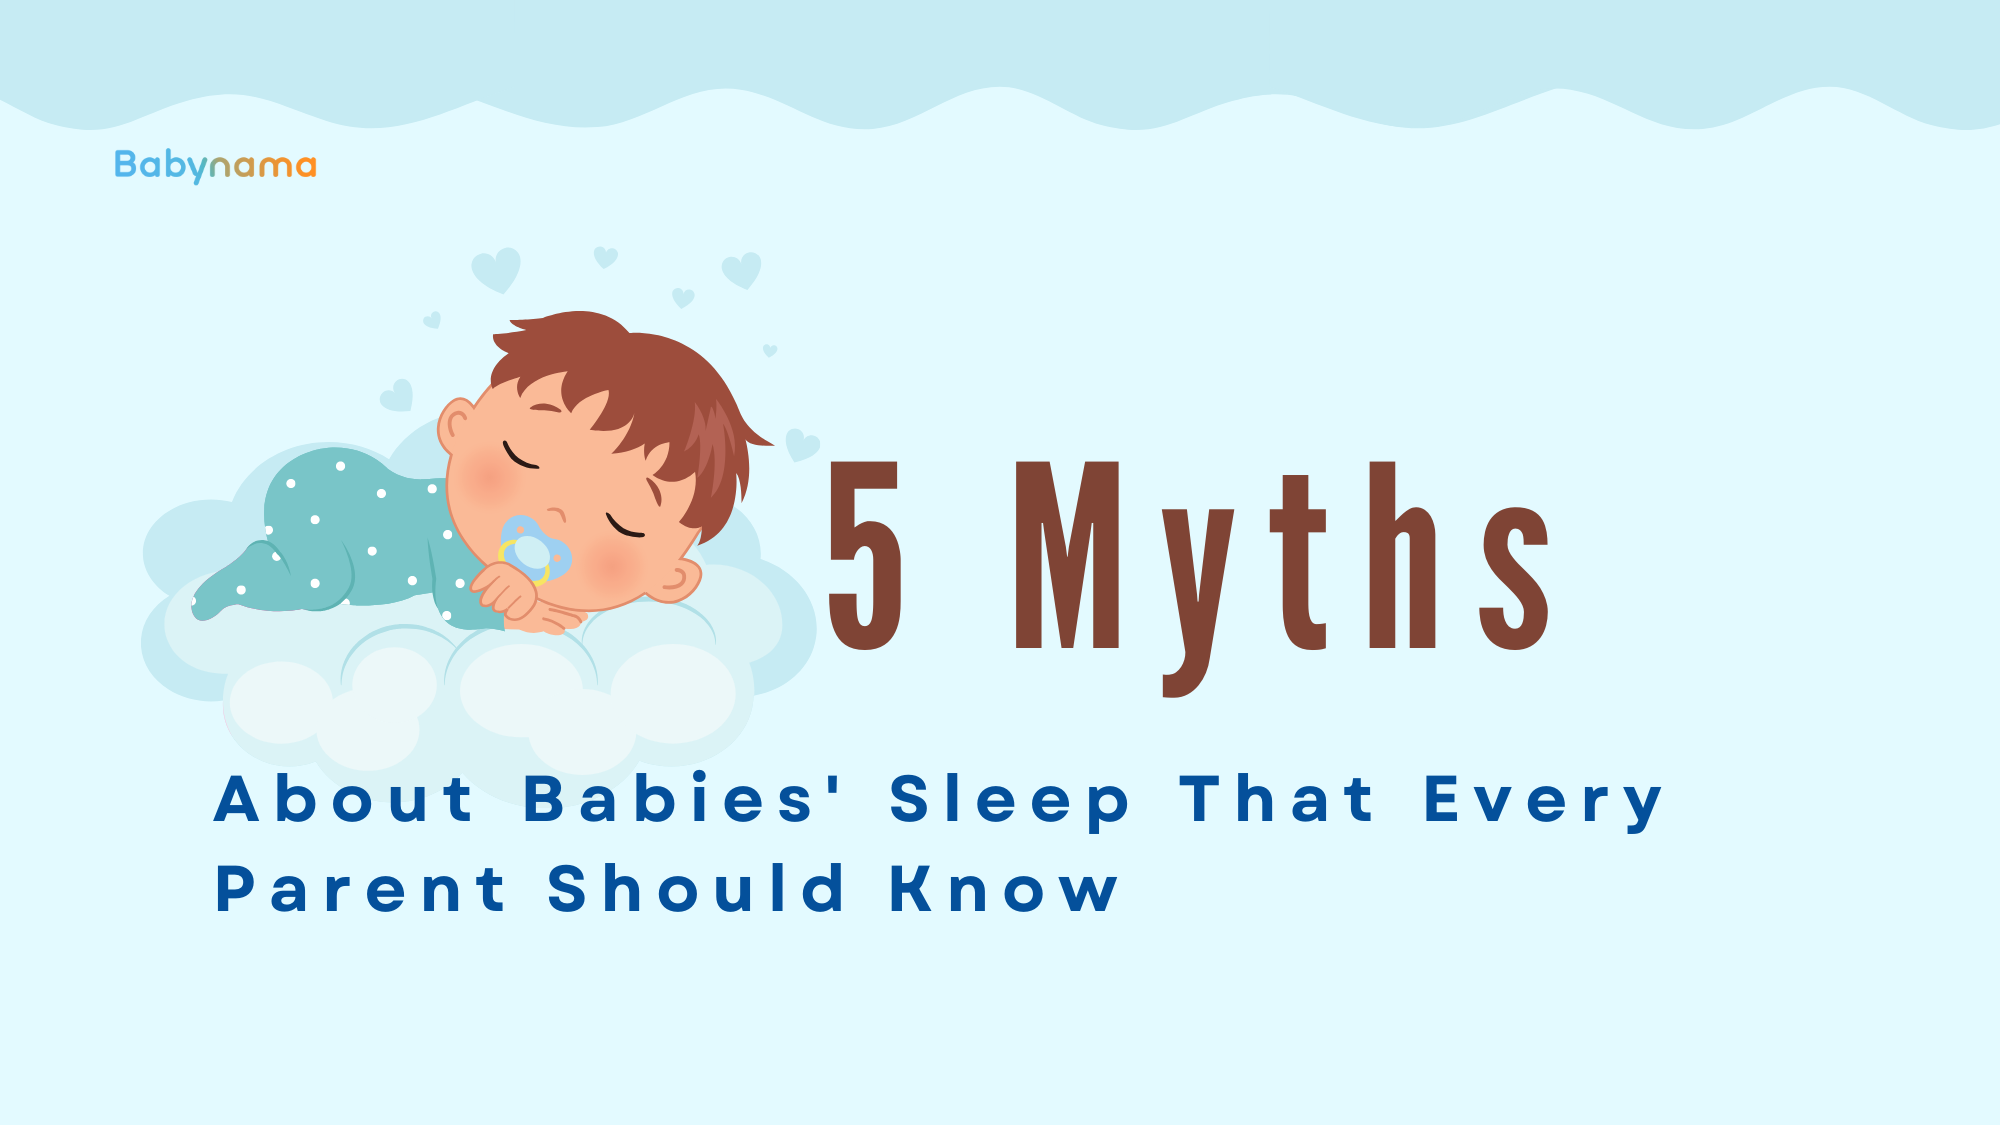 About Babies' Sleep That Every Parent Should Know